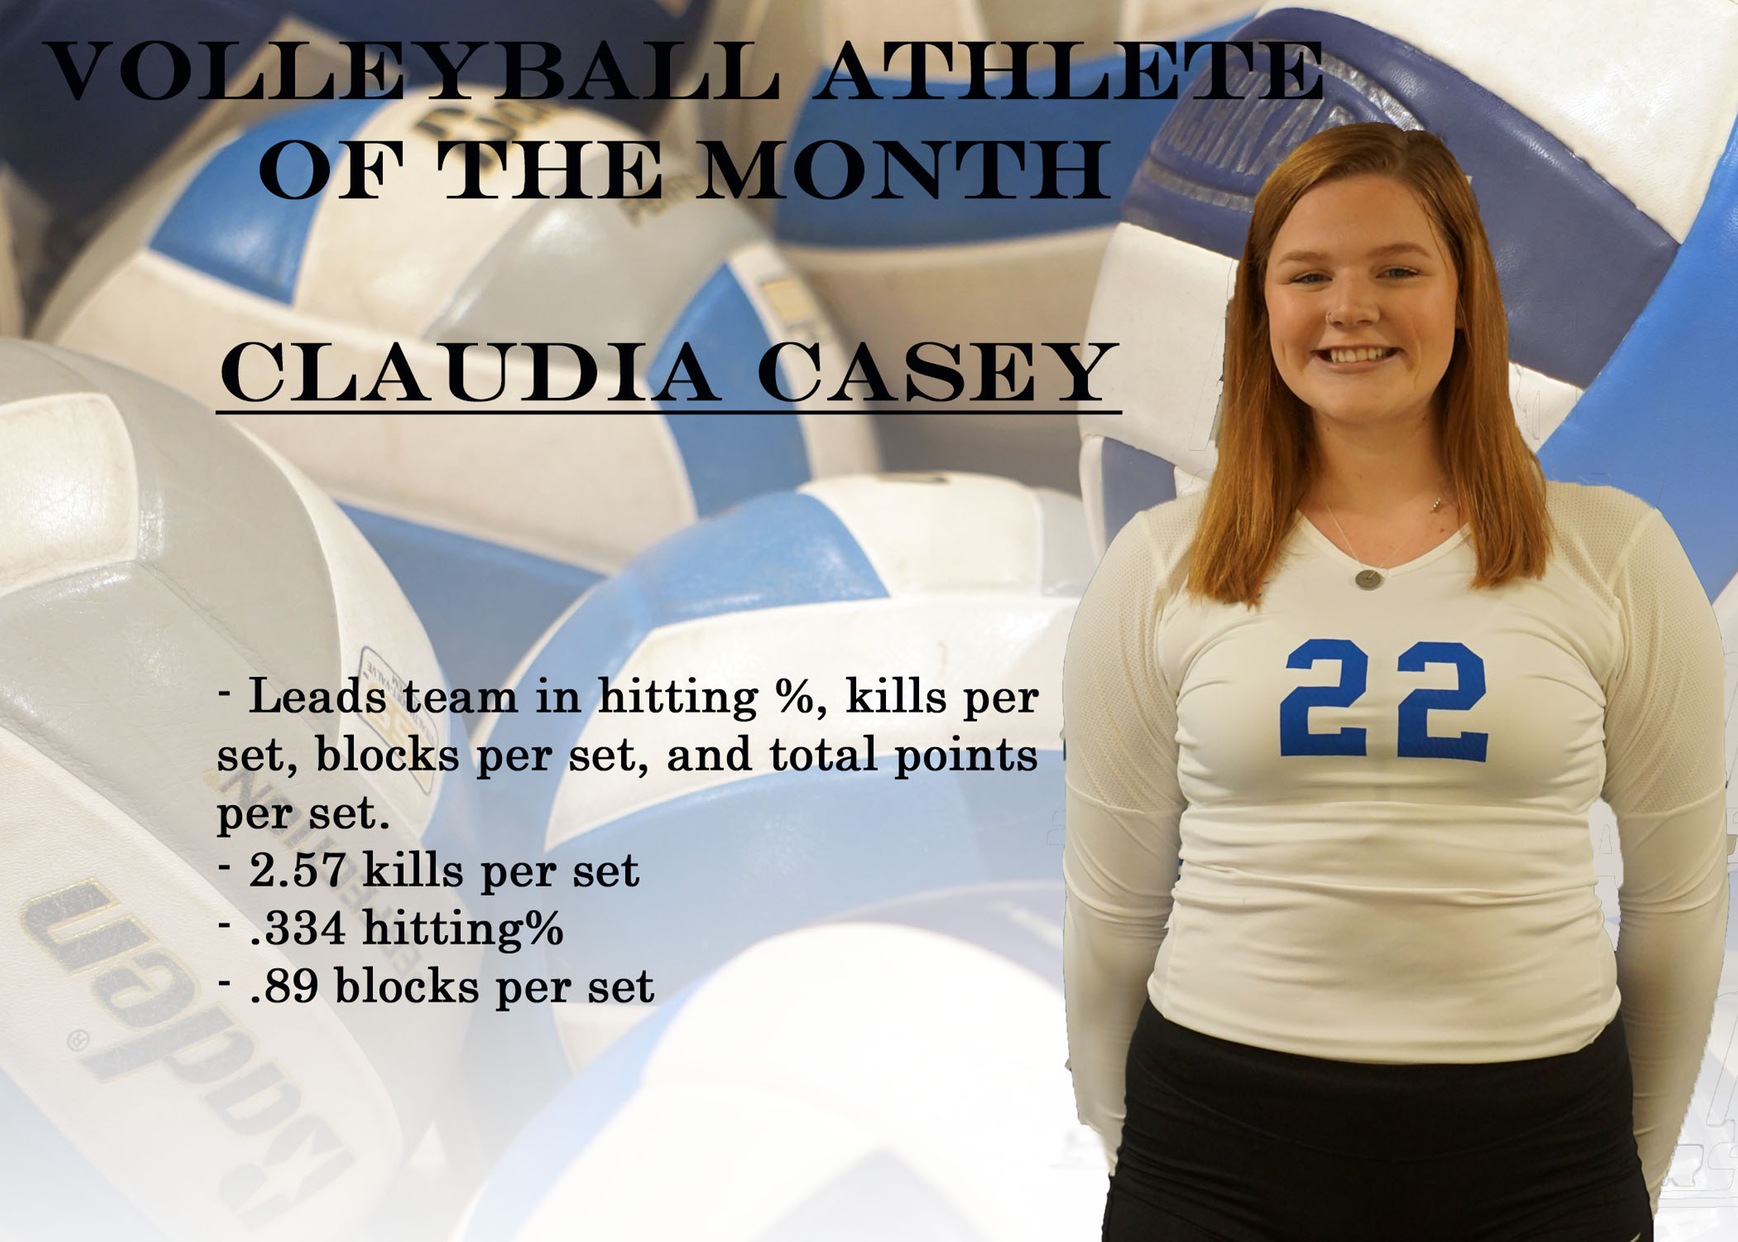 Volleyball Athlete of the Month